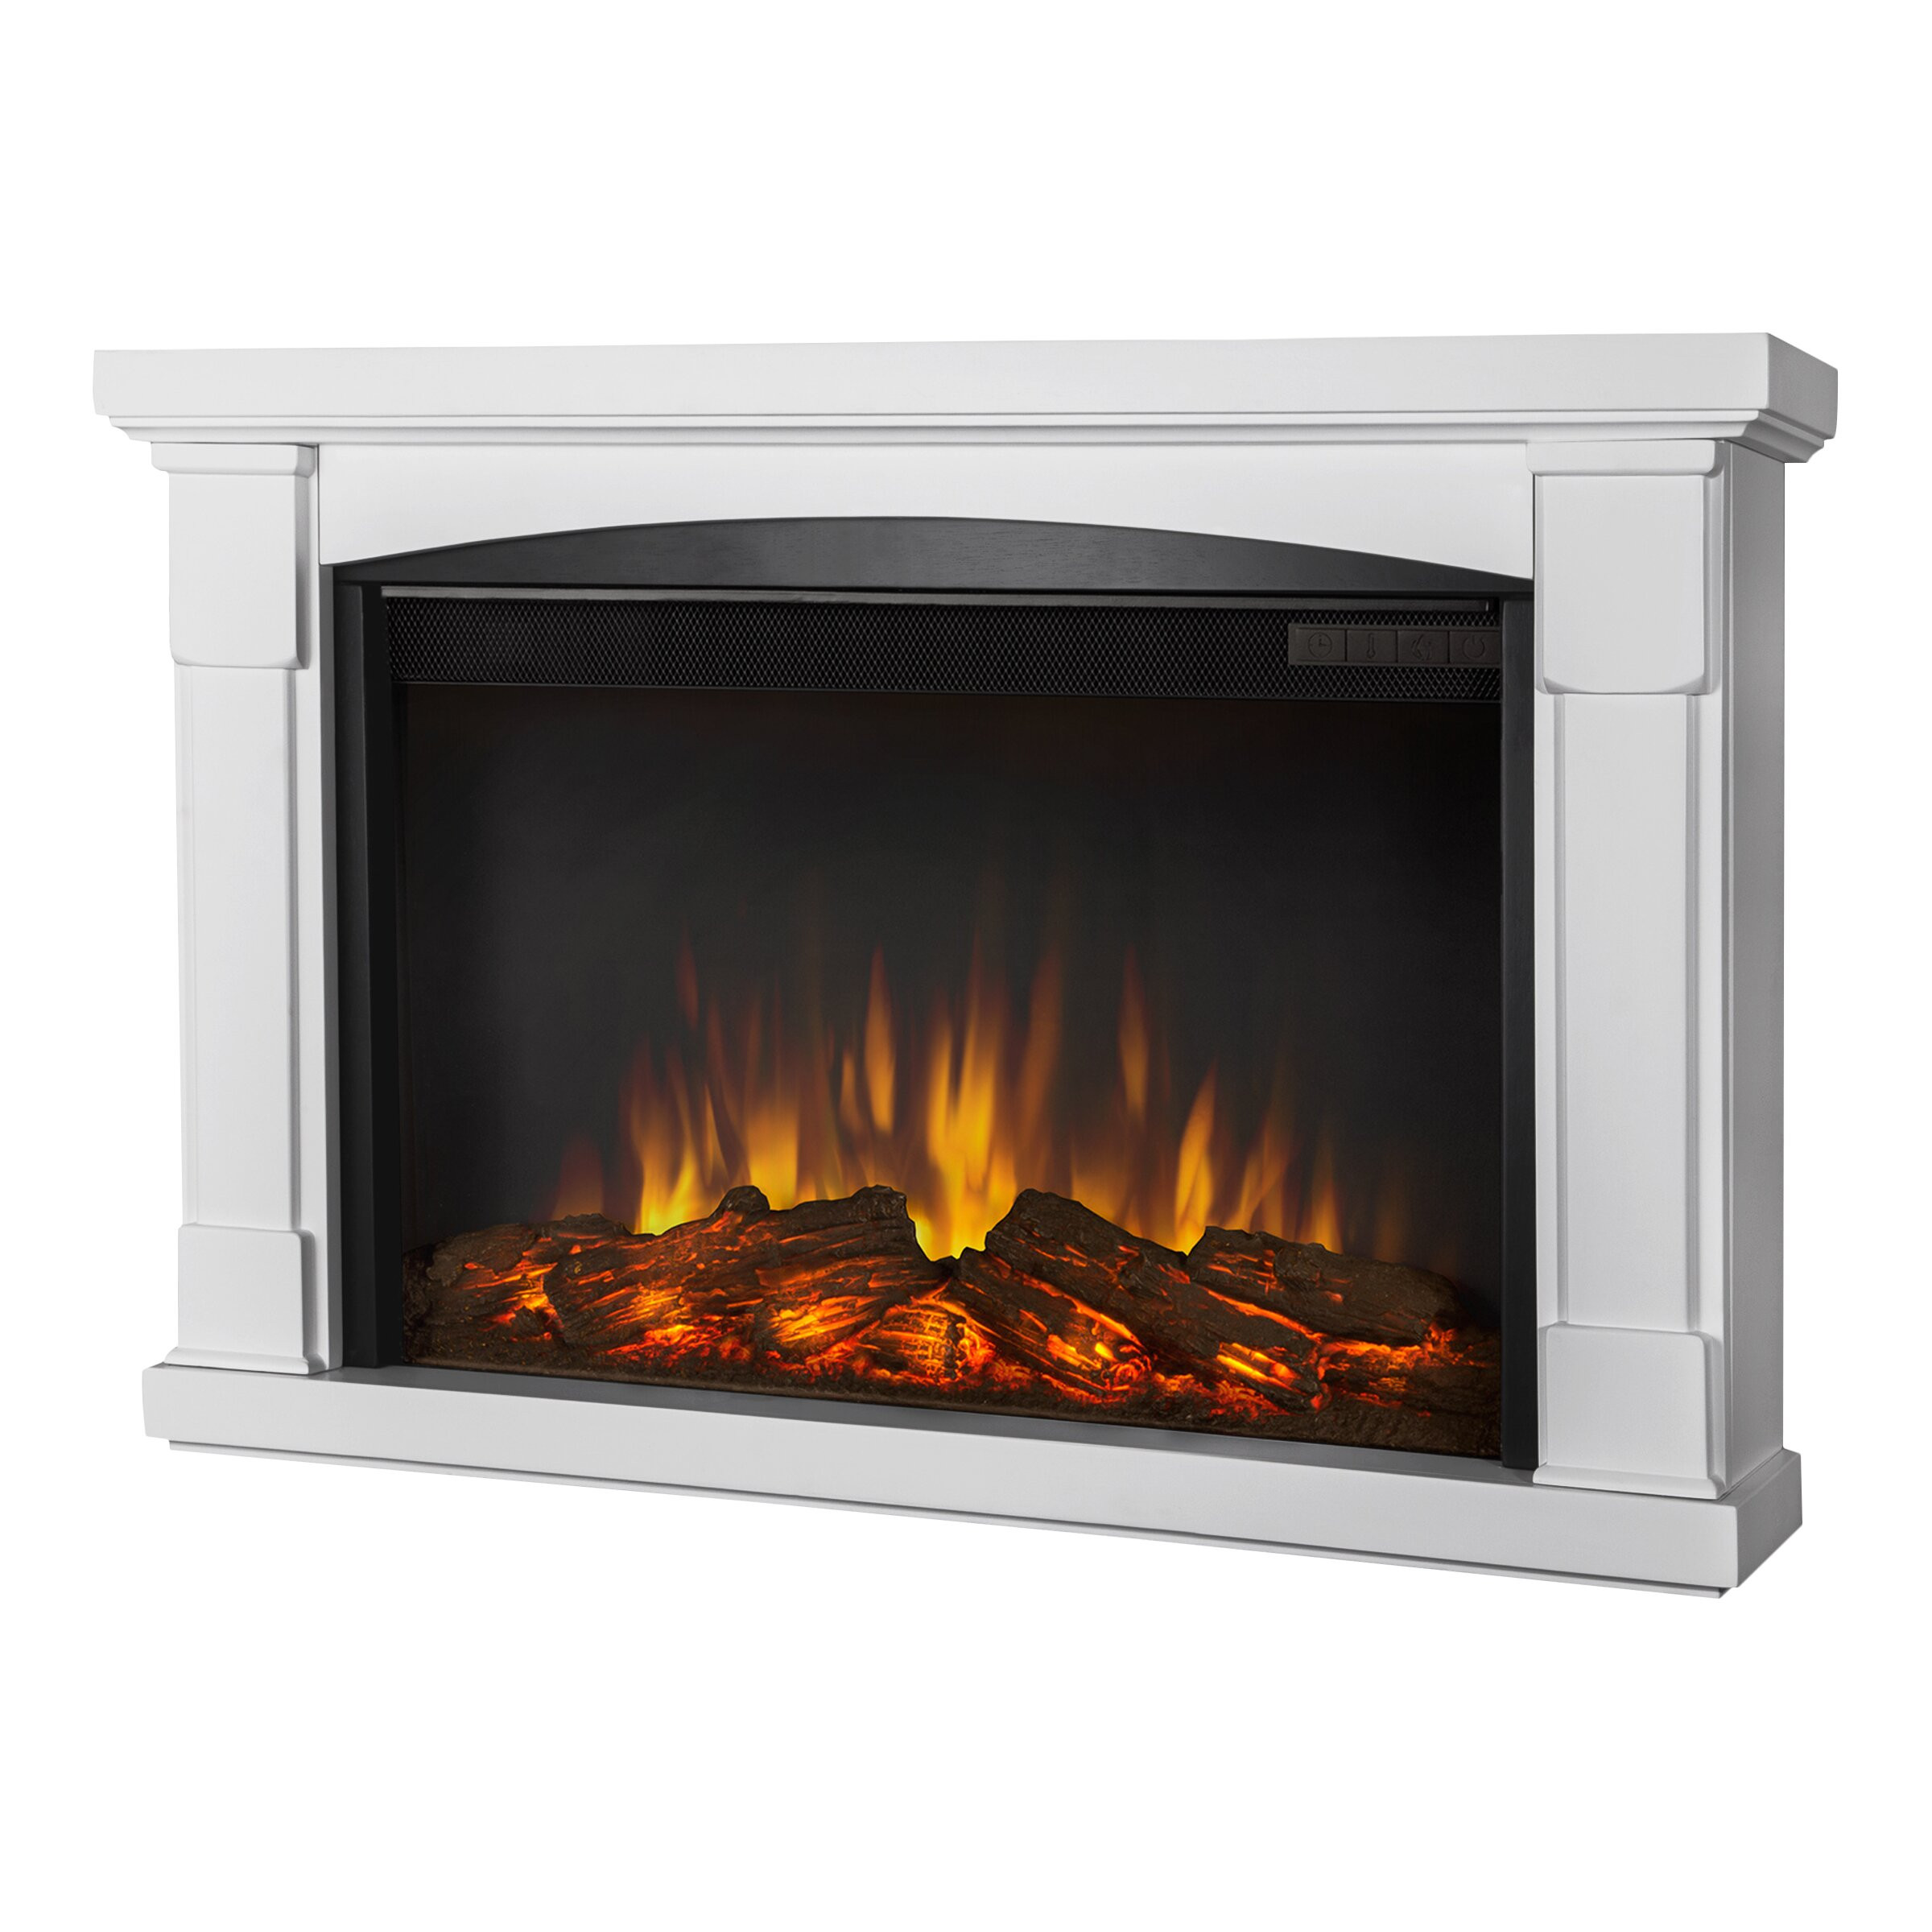 Wall Hung Electric Fireplace
 Slim Brighton Wall Mounted Electric Fireplace